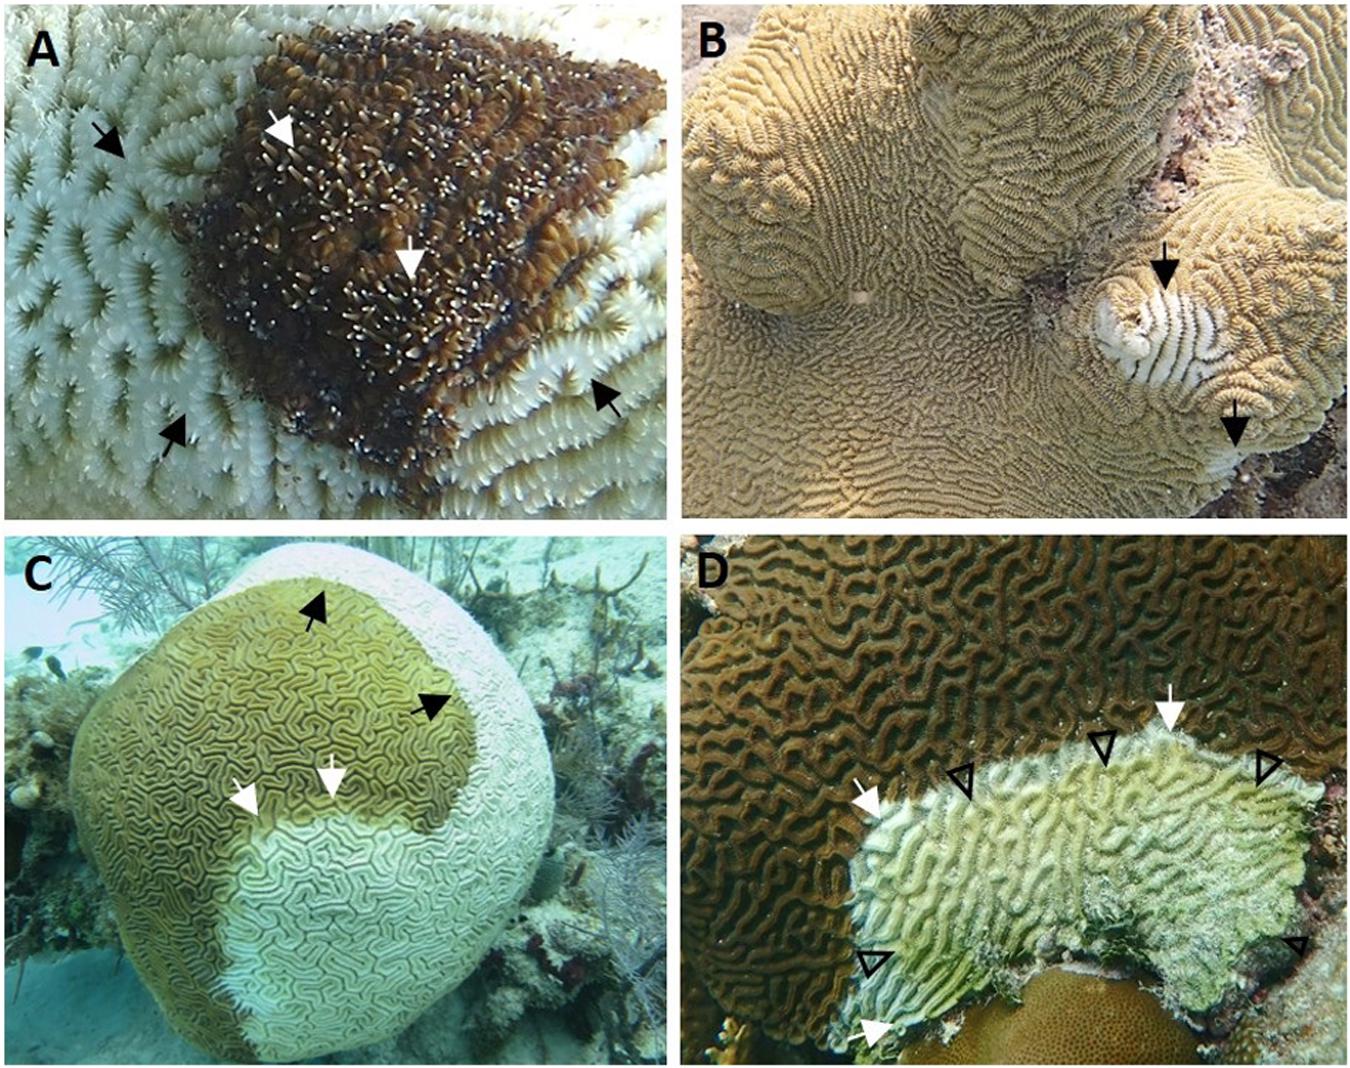 Frontiers | Stony Coral Tissue Loss Disease in Florida Is Associated ...